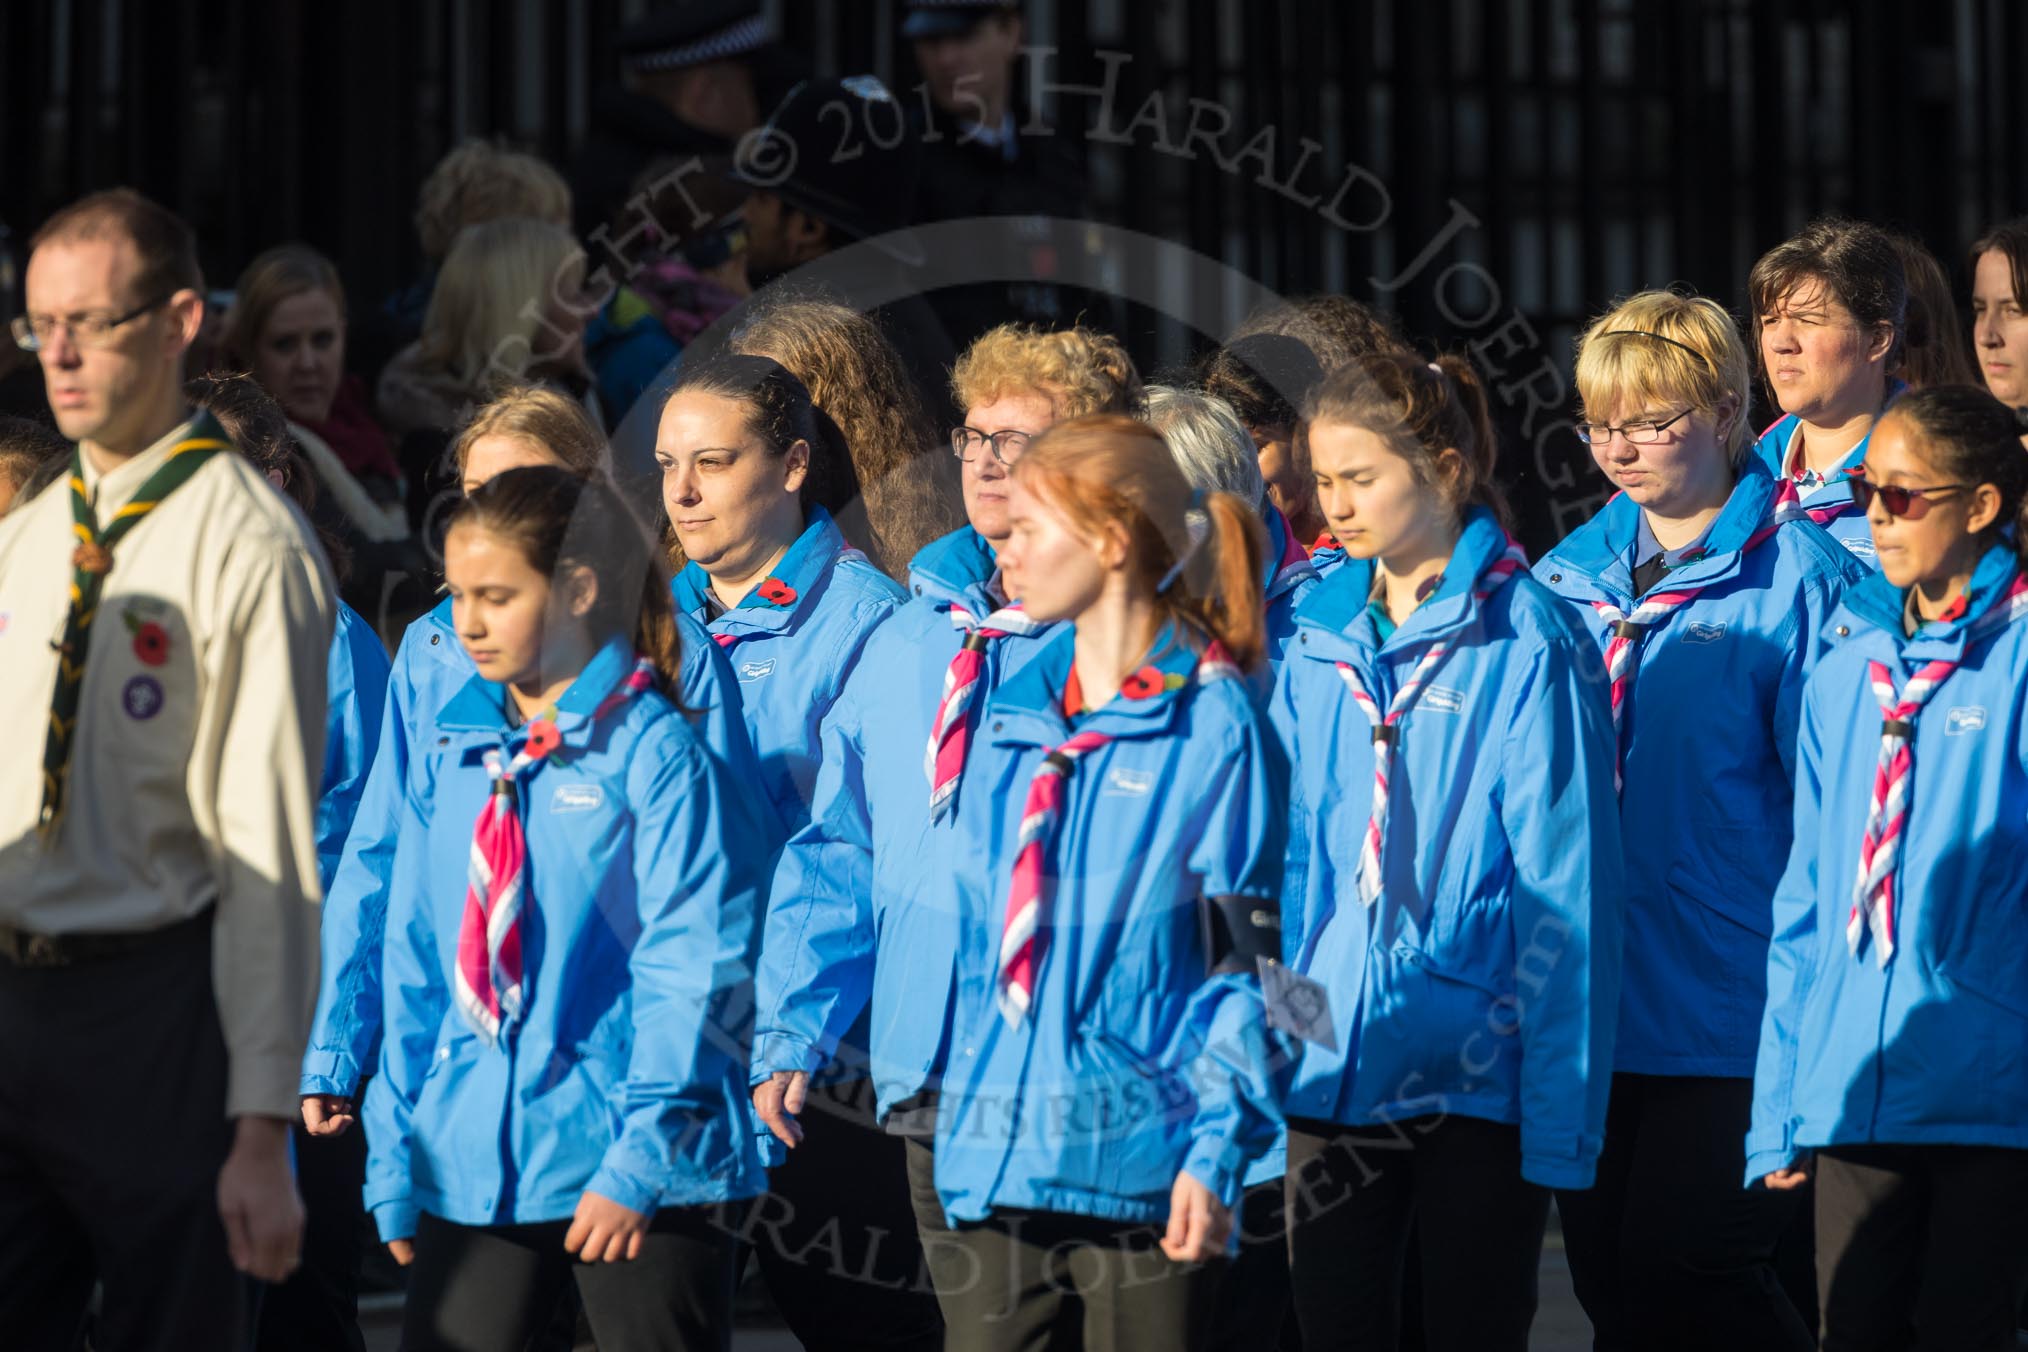 March Past, Remembrance Sunday at the Cenotaph 2016: M34 Girlguiding UK.
Cenotaph, Whitehall, London SW1,
London,
Greater London,
United Kingdom,
on 13 November 2016 at 13:18, image #2855